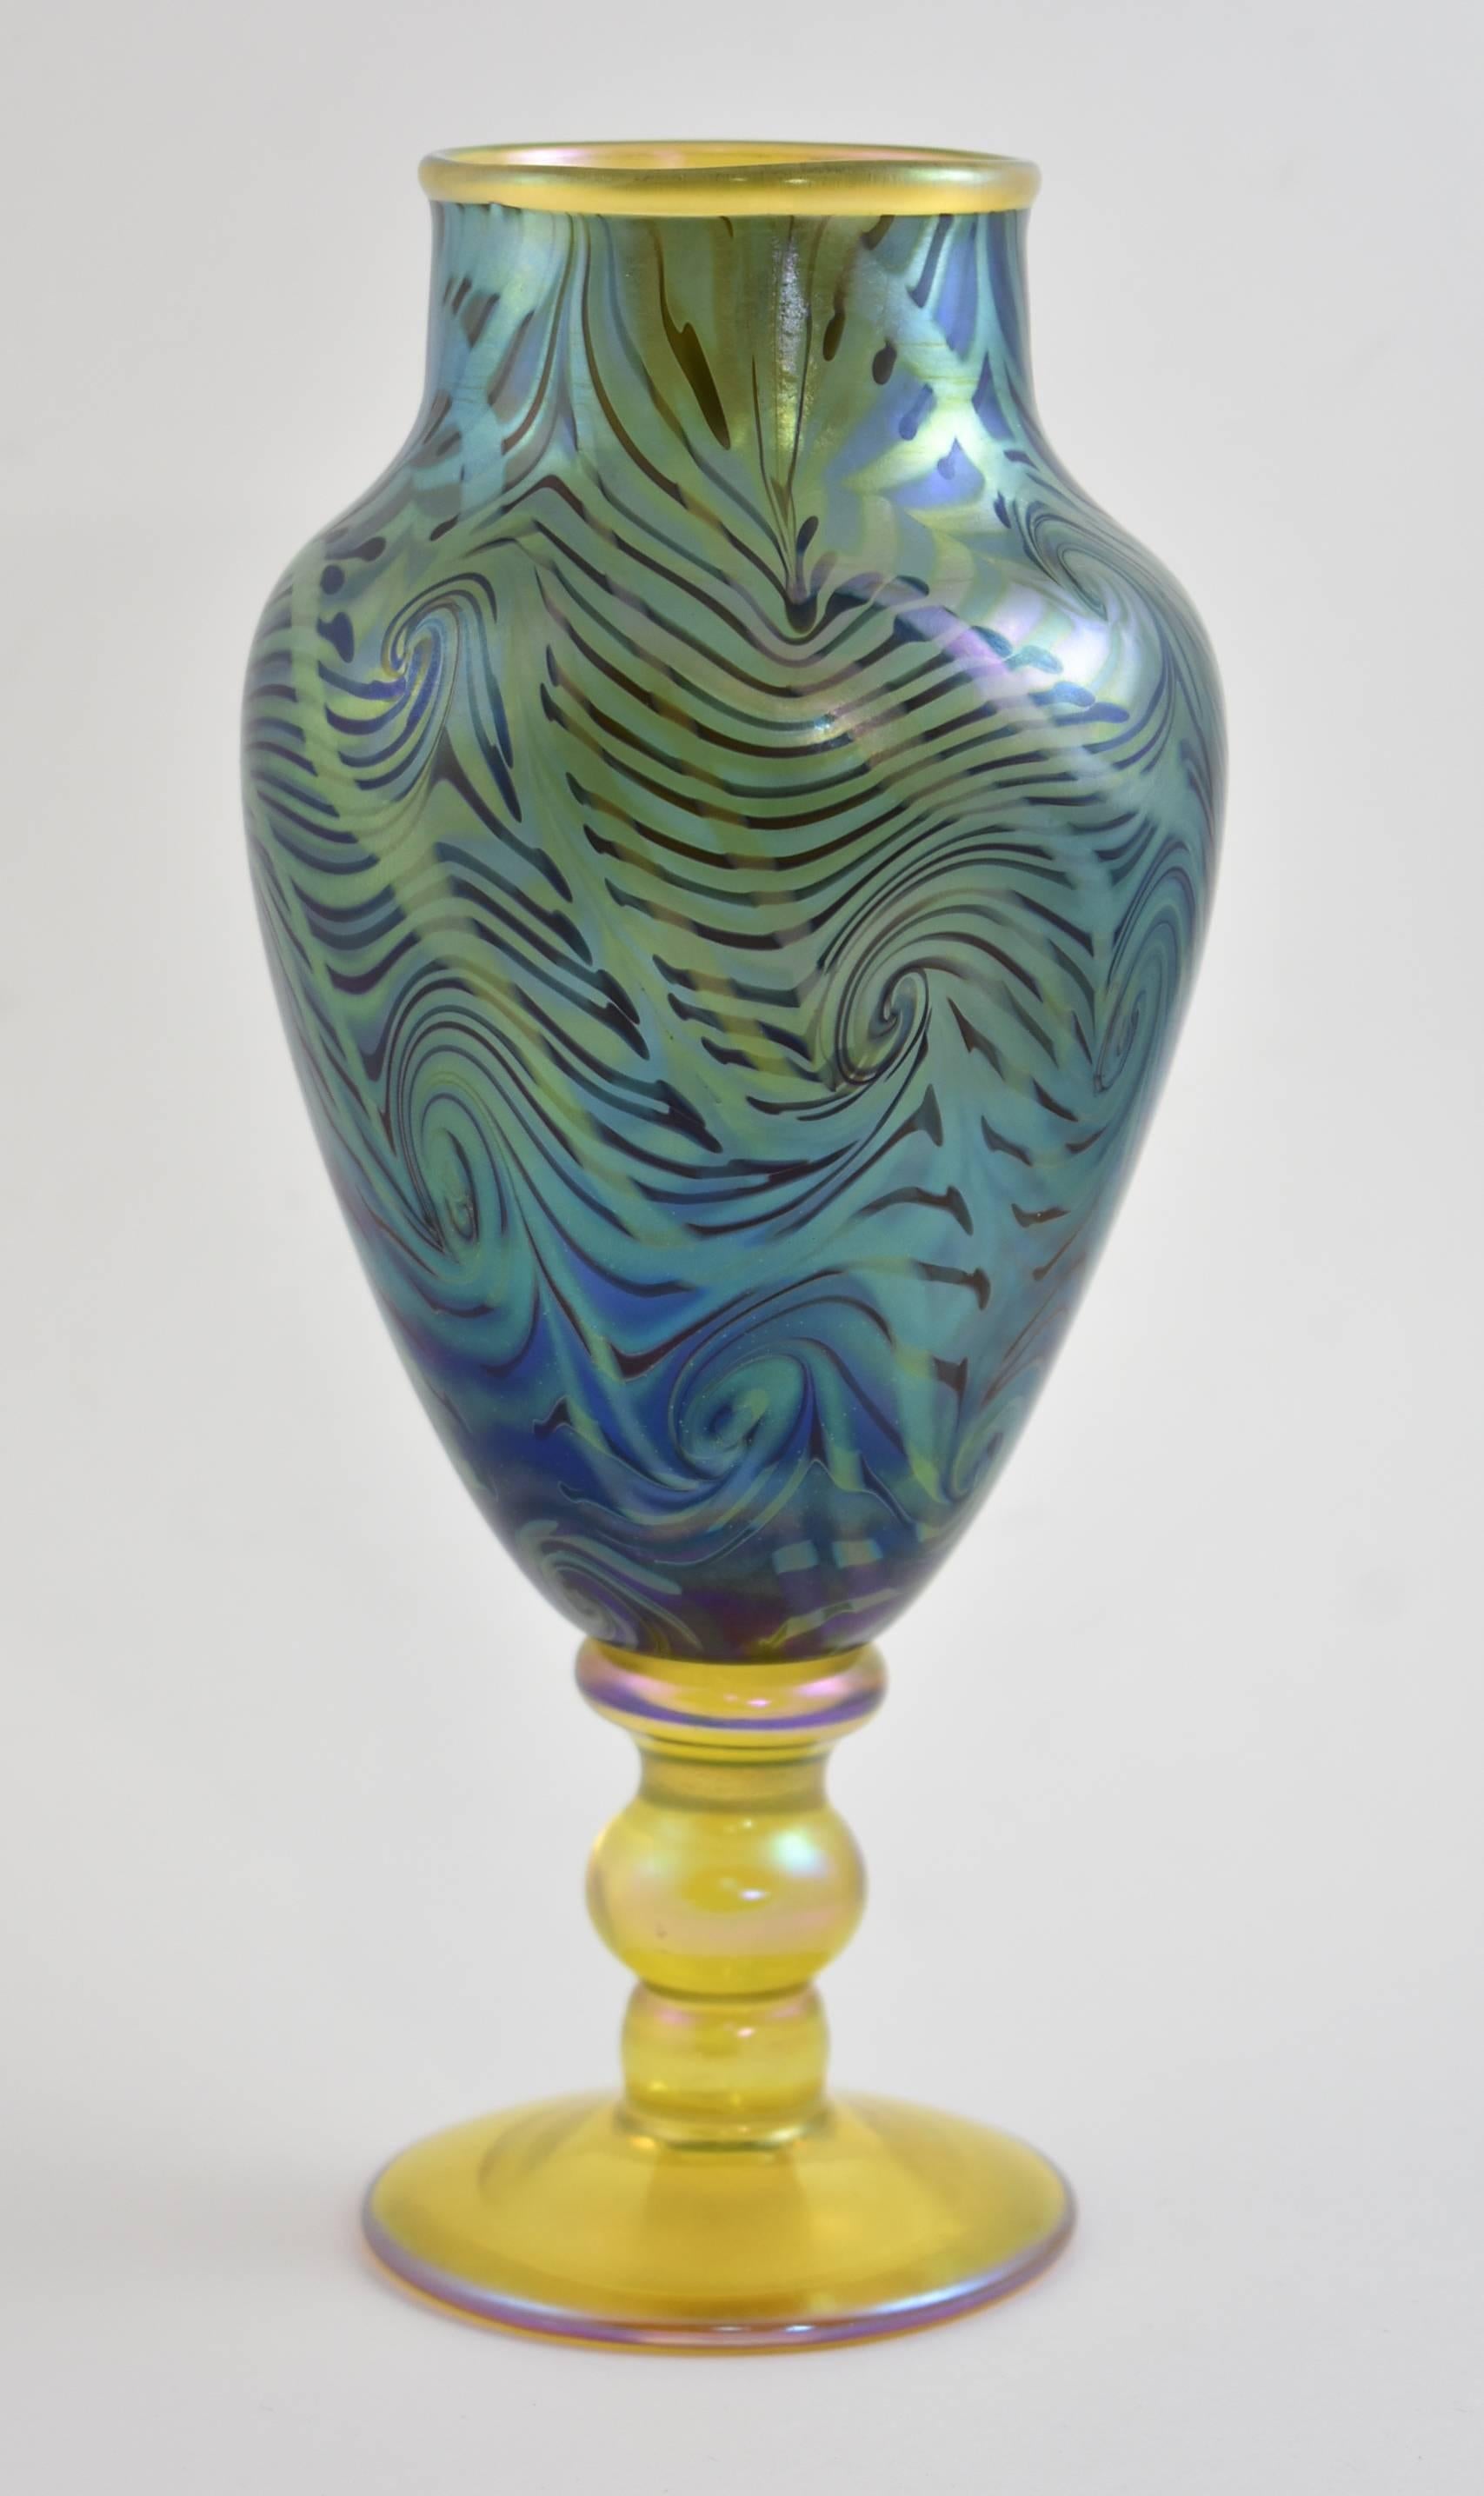 A unique footed vase by LCT Tiffany. Vase is 9